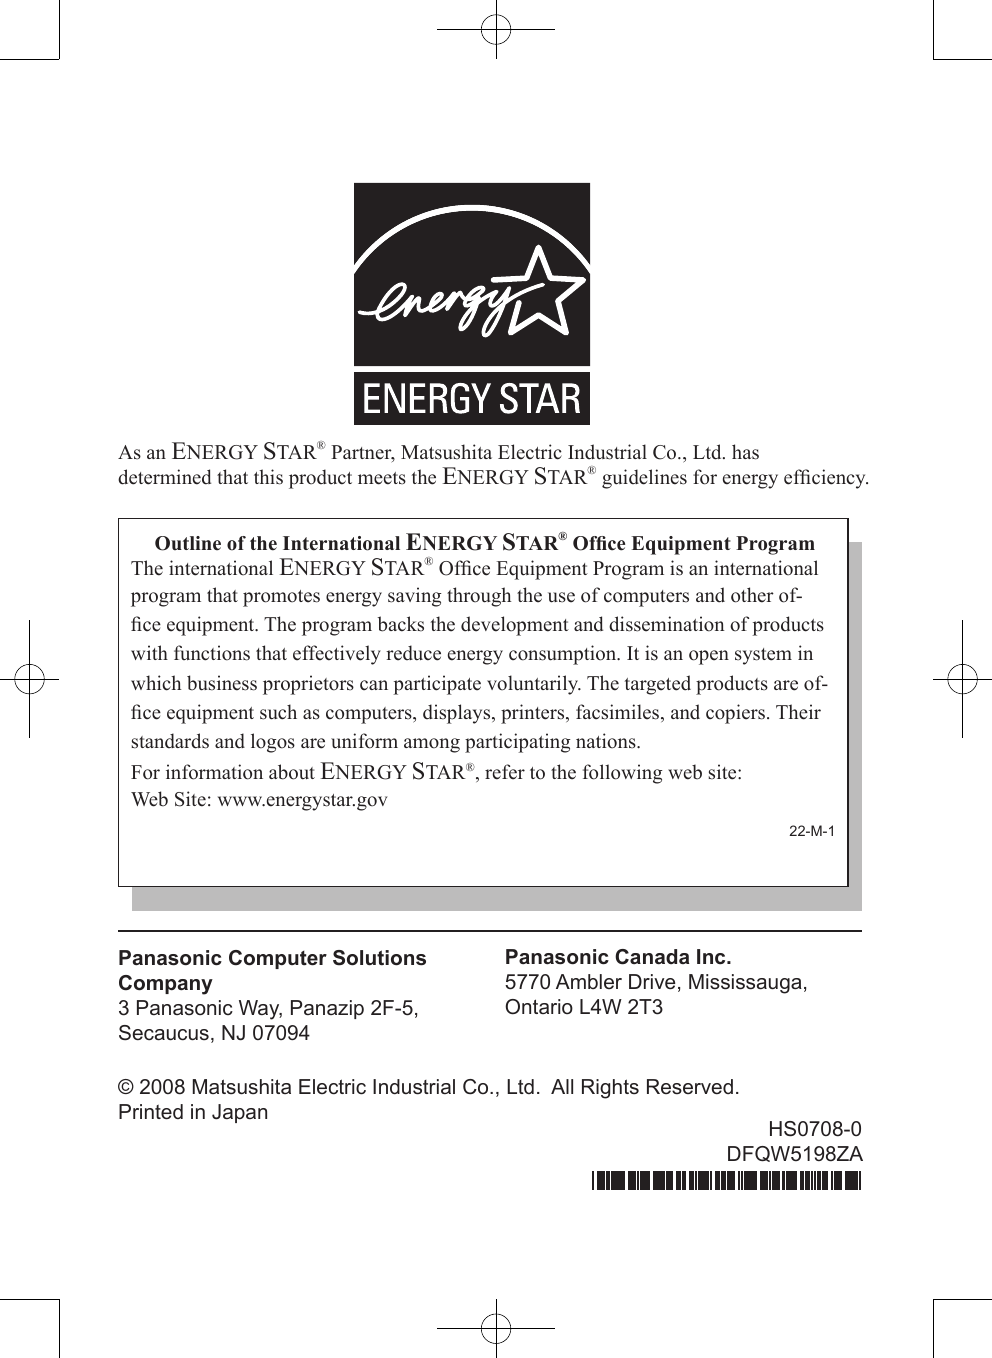 As an ENERGY STAR® Partner, Matsushita Electric Industrial Co., Ltd. hasdetermined that this product meets the ENERGY STAR® guidelines for energy efﬁciency.Outline of the International ENERGY STAR® Ofﬁce Equipment ProgramThe international ENERGY STAR® Ofﬁce Equipment Program is an international program that promotes energy saving through the use of computers and other of-ﬁce equipment. The program backs the development and dissemination of products with functions that effectively reduce energy consumption. It is an open system in which business proprietors can participate voluntarily. The targeted products are of-ﬁce equipment such as computers, displays, printers, facsimiles, and copiers. Their standards and logos are uniform among participating nations.For information about ENERGY STAR®, refer to the following web site:Web Site: www.energystar.gov22-M-1Panasonic Computer Solutions Company3 Panasonic Way, Panazip 2F-5,Secaucus, NJ 07094Panasonic Canada Inc.5770 Ambler Drive, Mississauga,Ontario L4W 2T3© 2008 Matsushita Electric Industrial Co., Ltd.  All Rights Reserved.Printed in Japan HS0708-0DFQW5198ZA